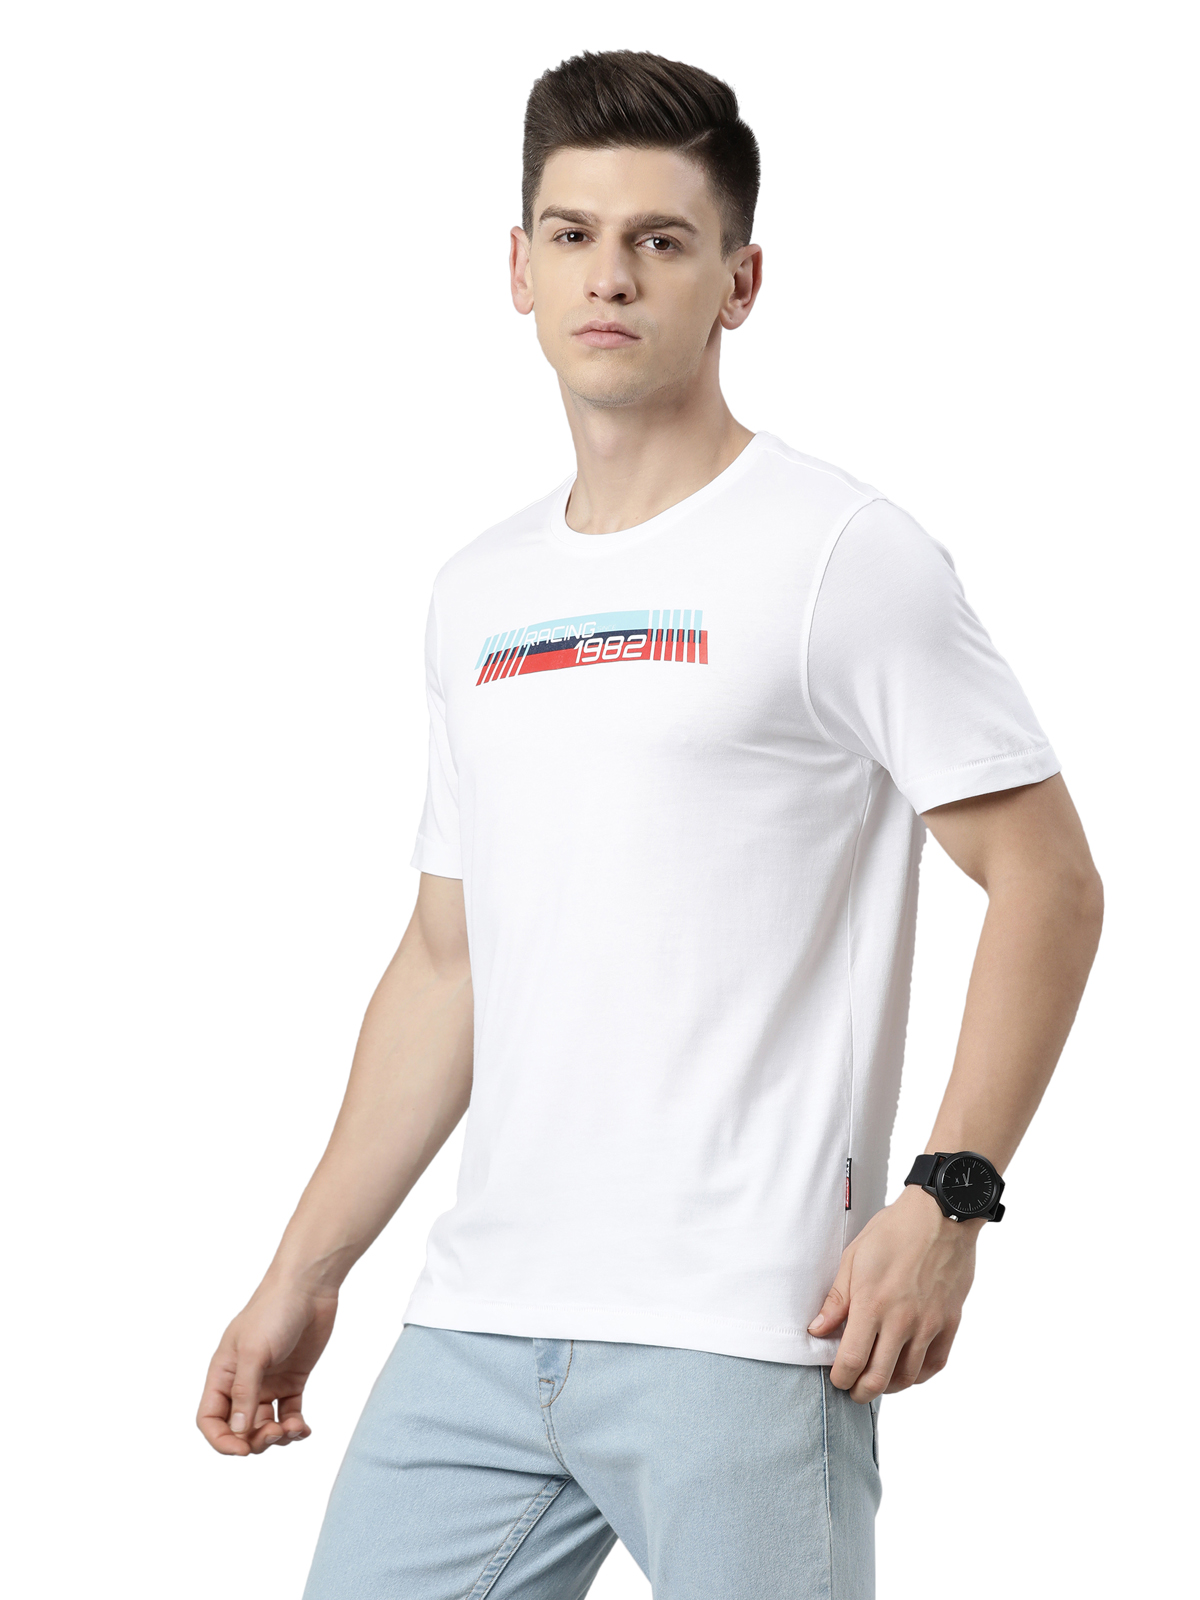 TVS RACING TRIBE ROUND NECK TEE 1982 TYPE 4 WHITE Online at Best Prices ...